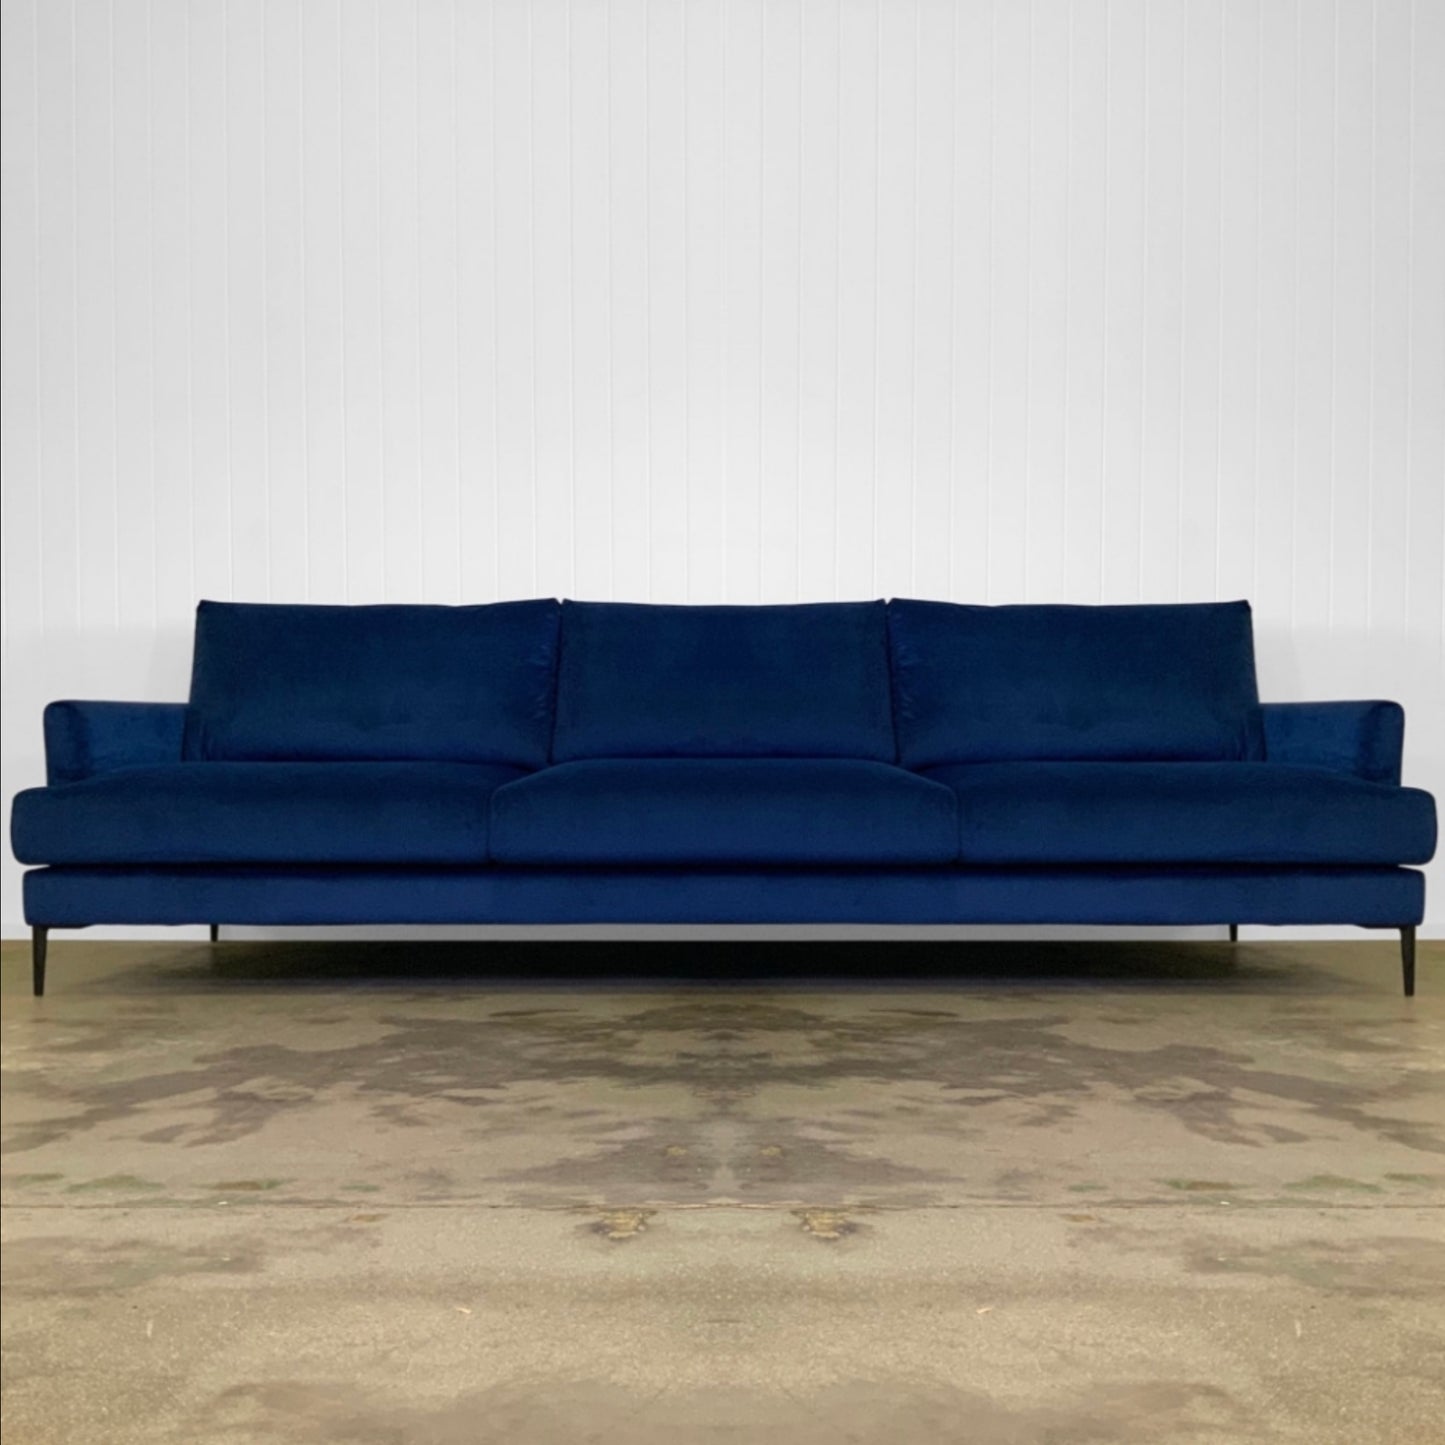 N.Y.C. LOFT SOFA | EASY CHOICE FABRICS | MULTIPLE SIZES AND OPTIONS AVAILABLE | MADE TO ORDER IN WA